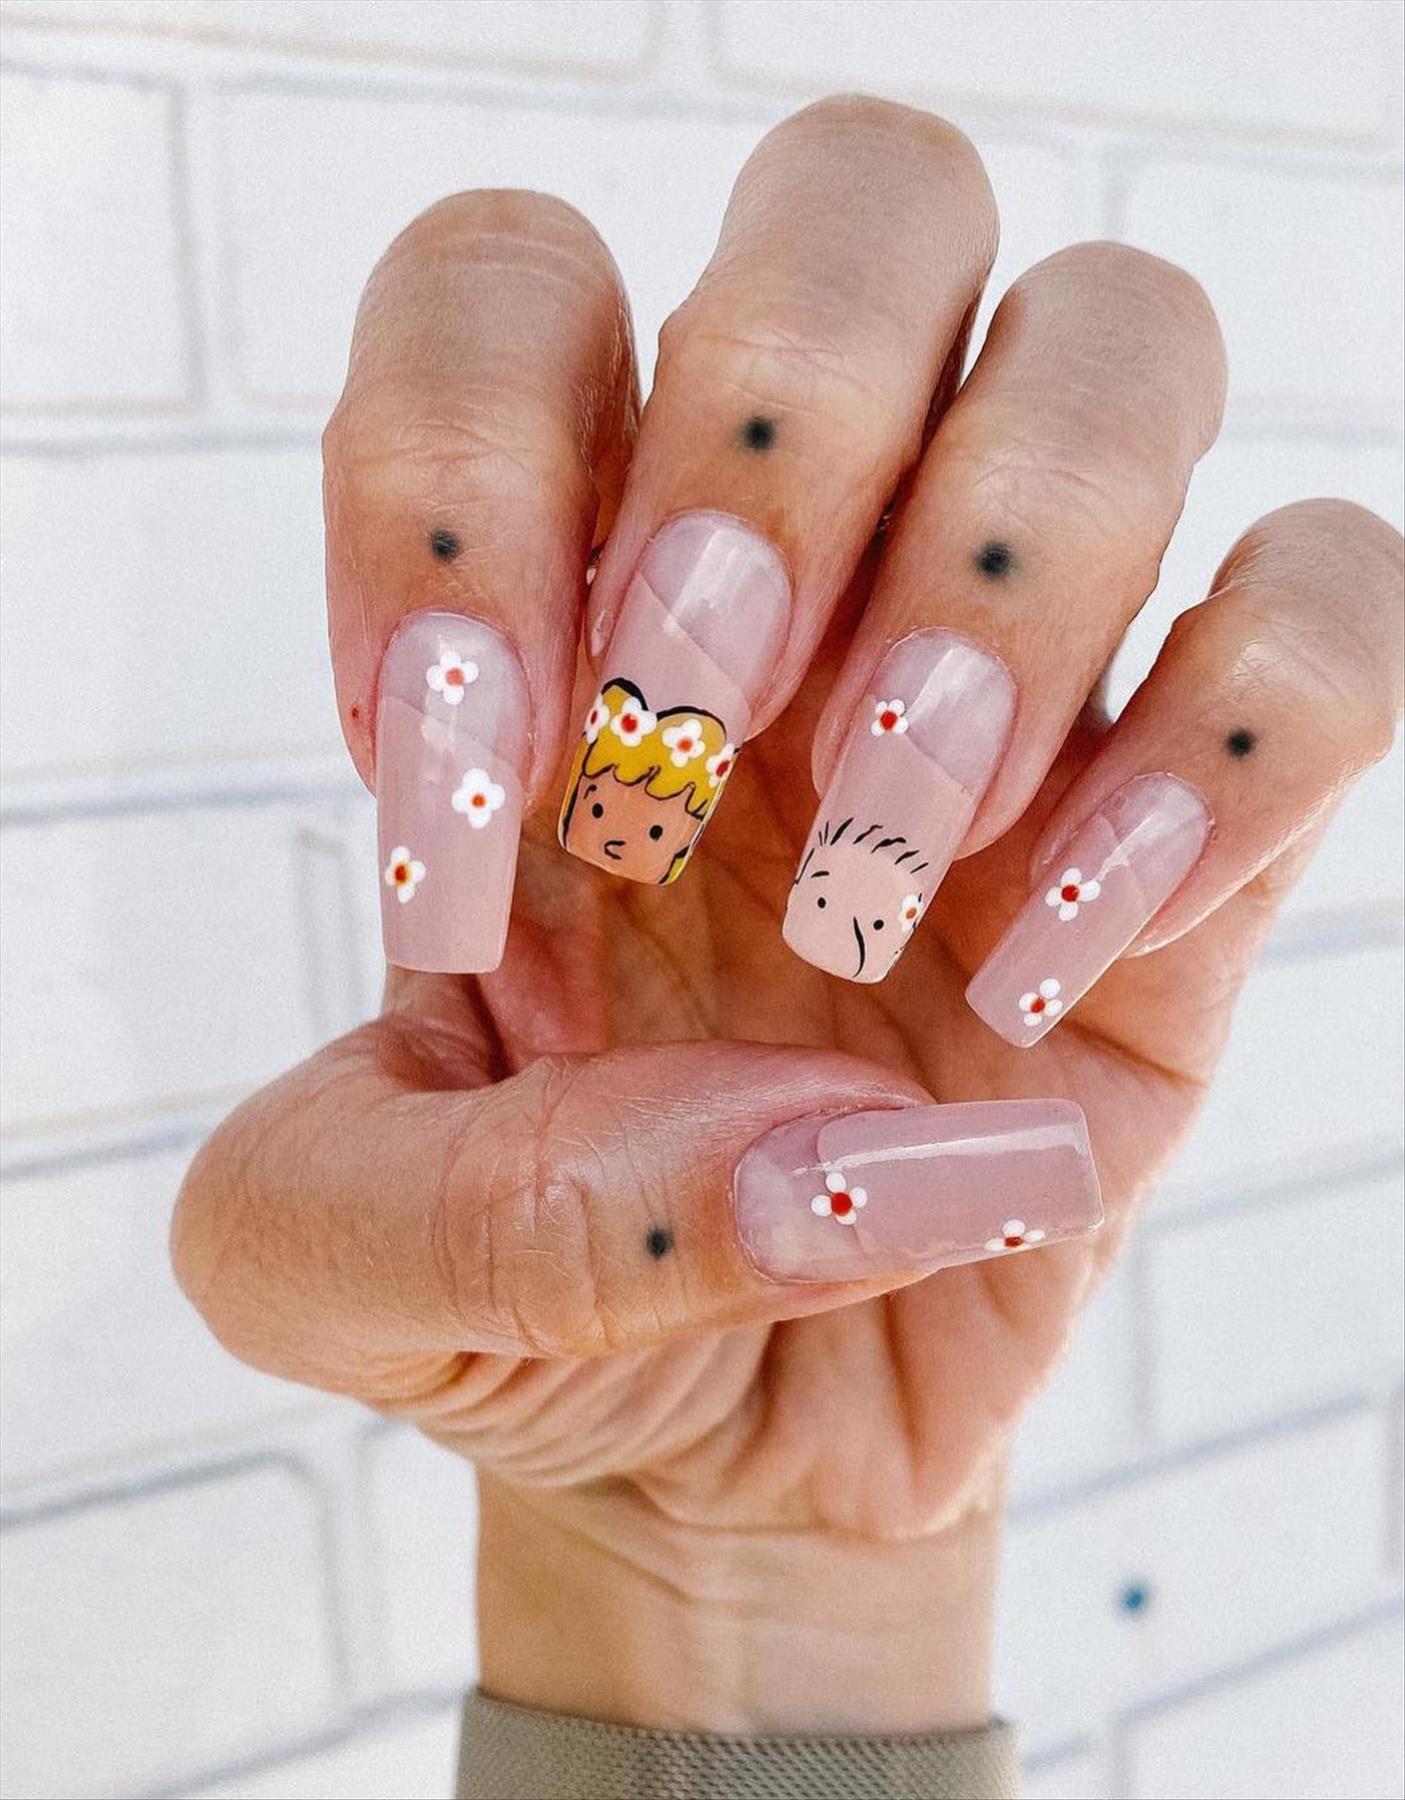 Best Spring Coffin Nails to Flip For in 2022